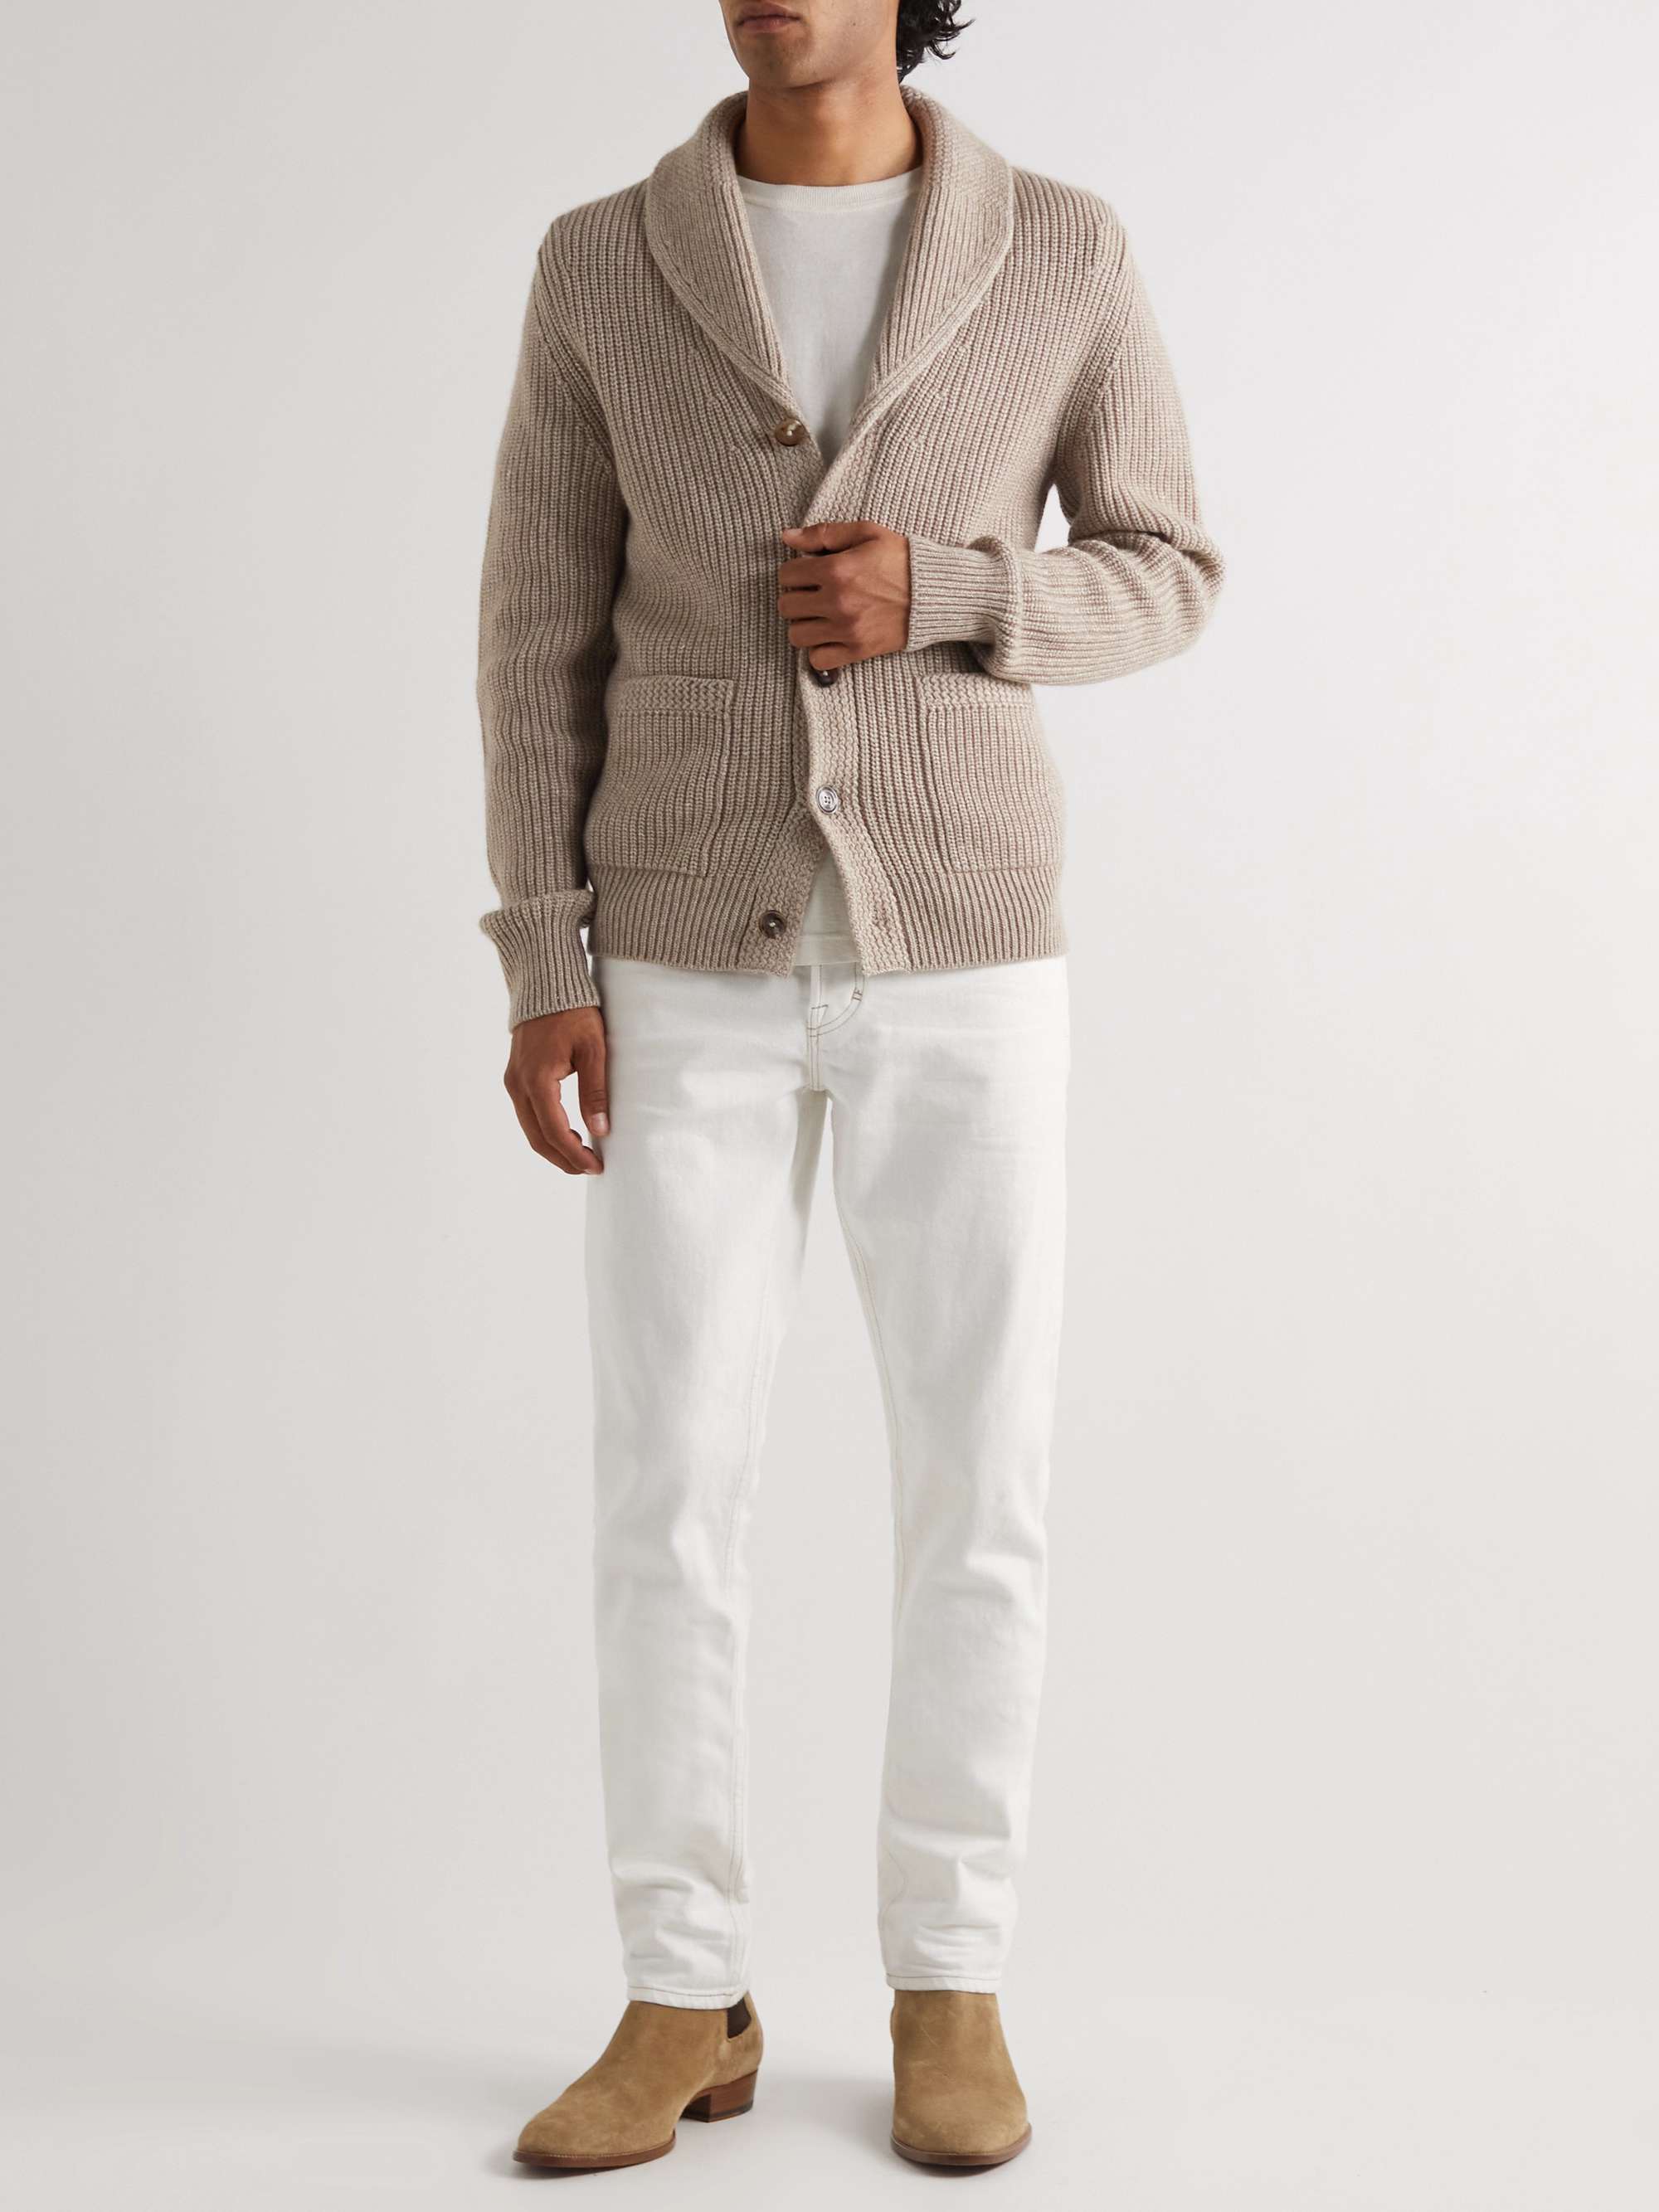 TOM FORD Shawl-Collar Ribbed-Knit Cashmere and Linen-Blend Cardigan